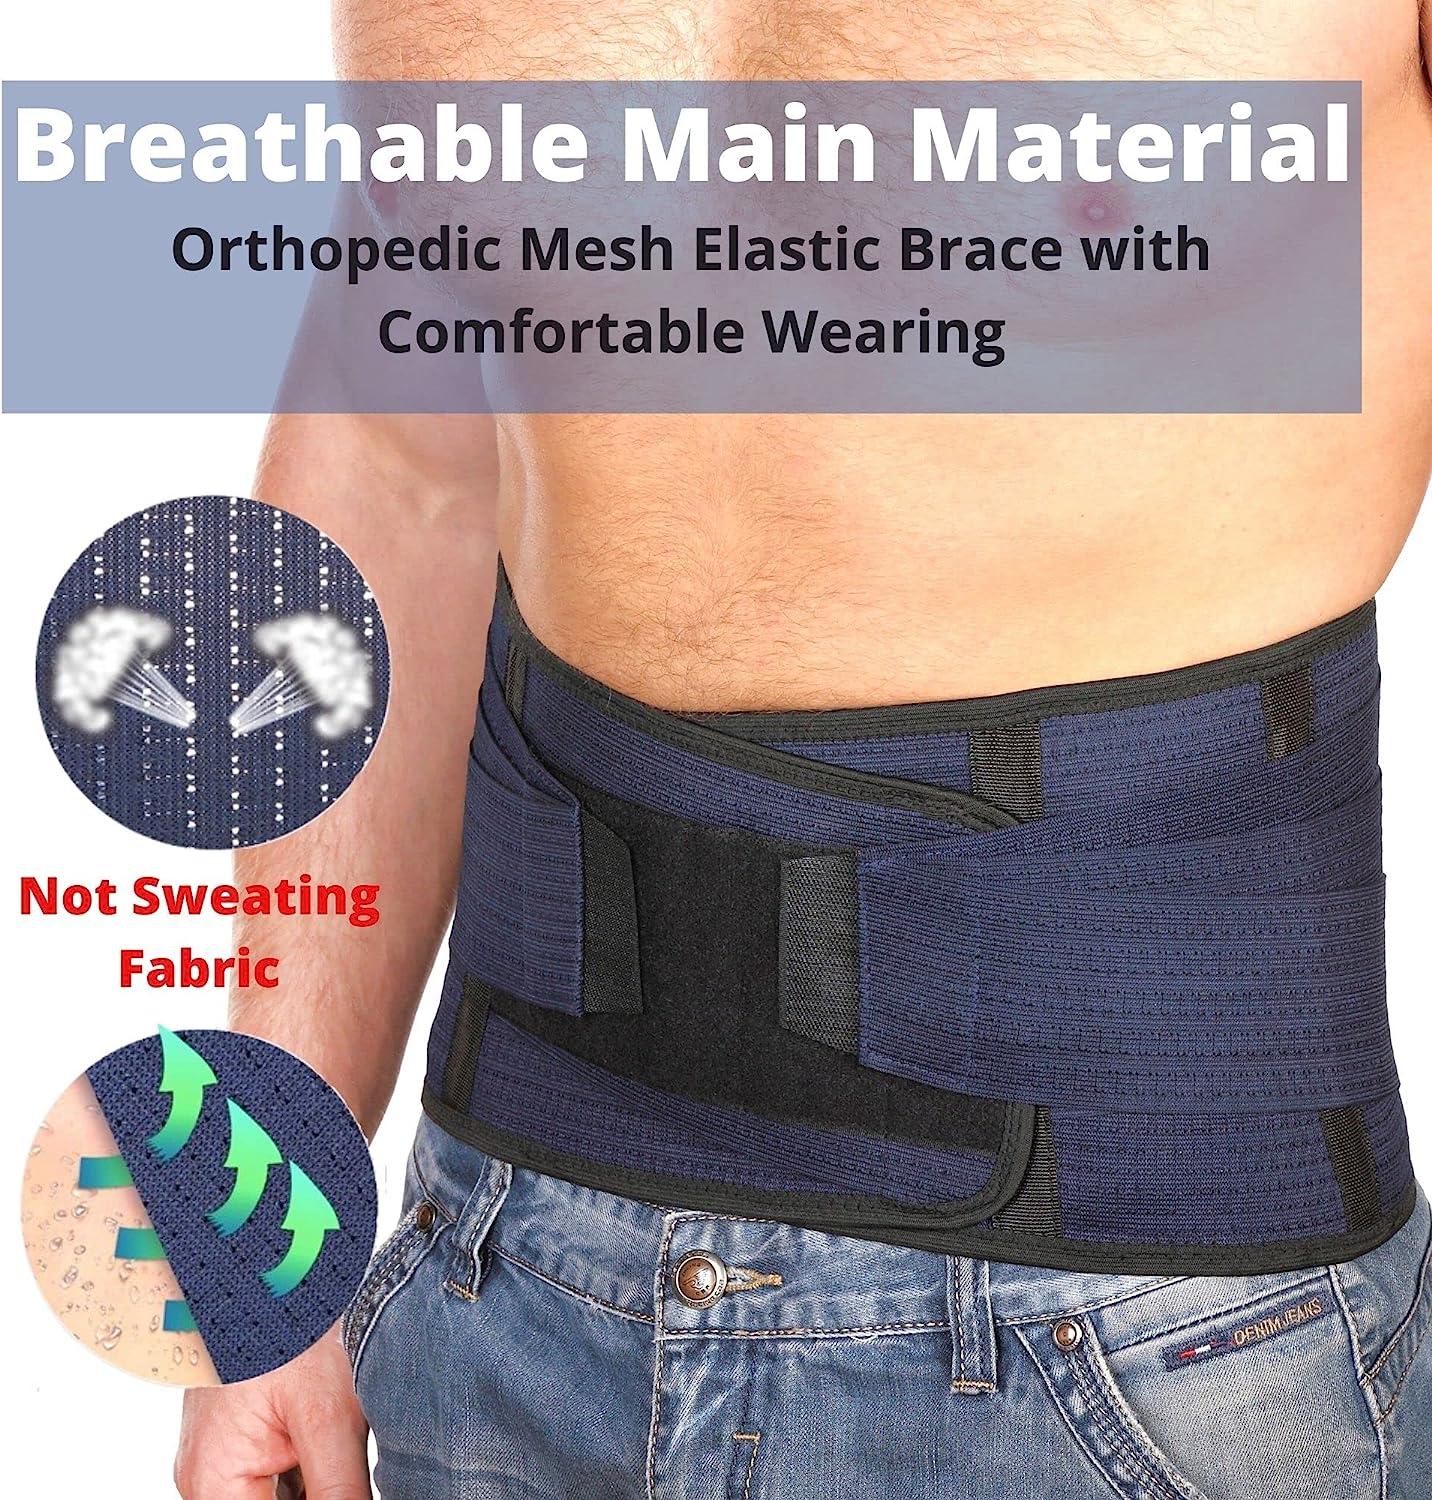 AVESTON Back Support Lower Back Brace for Back Pain Relief - Thin  Breathable Rigid 6 ribs Adjustable Lumbar Support Belt Men/Women Keeps Your  Spine Straight, Surgery, Fracture - Medium 32-37 Belly Medium (32-37 Inch)